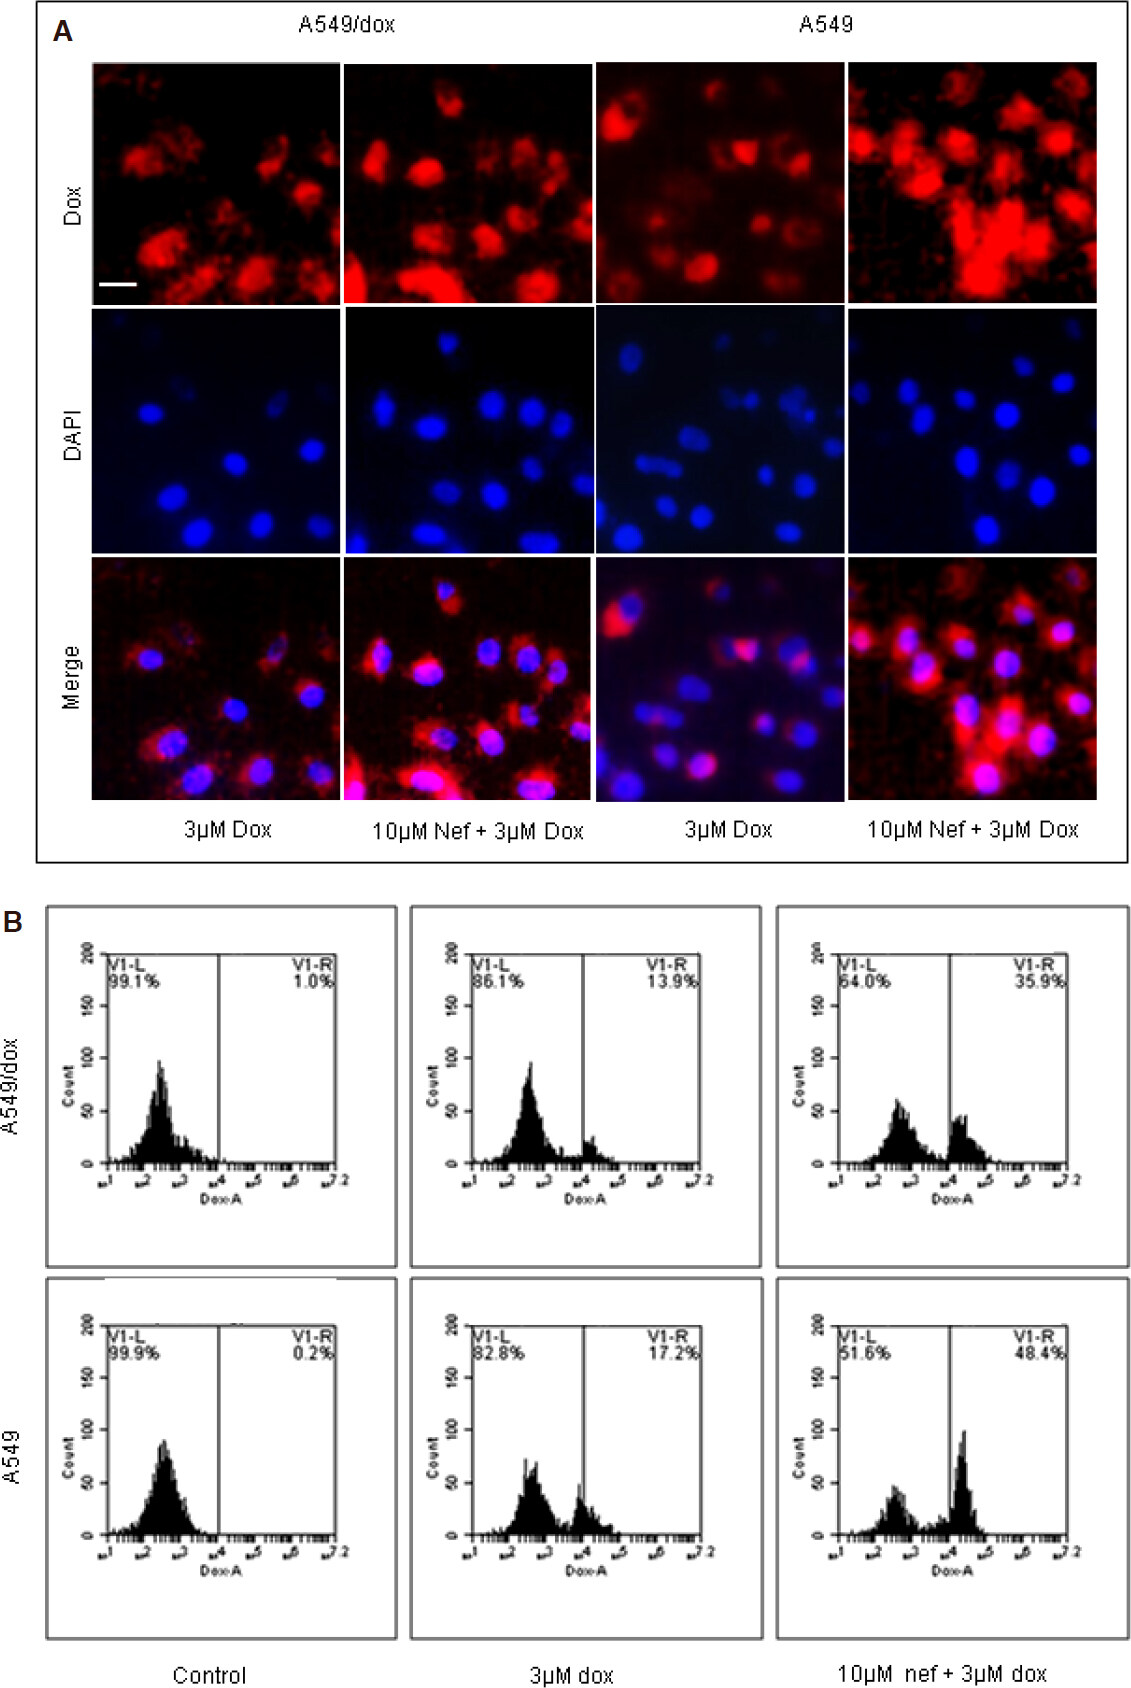 Reversal of doxorubicin resistance in lung cancer cells by neferine is explained by nuclear factor erythroid-derived 2-like 2 mediated lung resistance protein down regulation